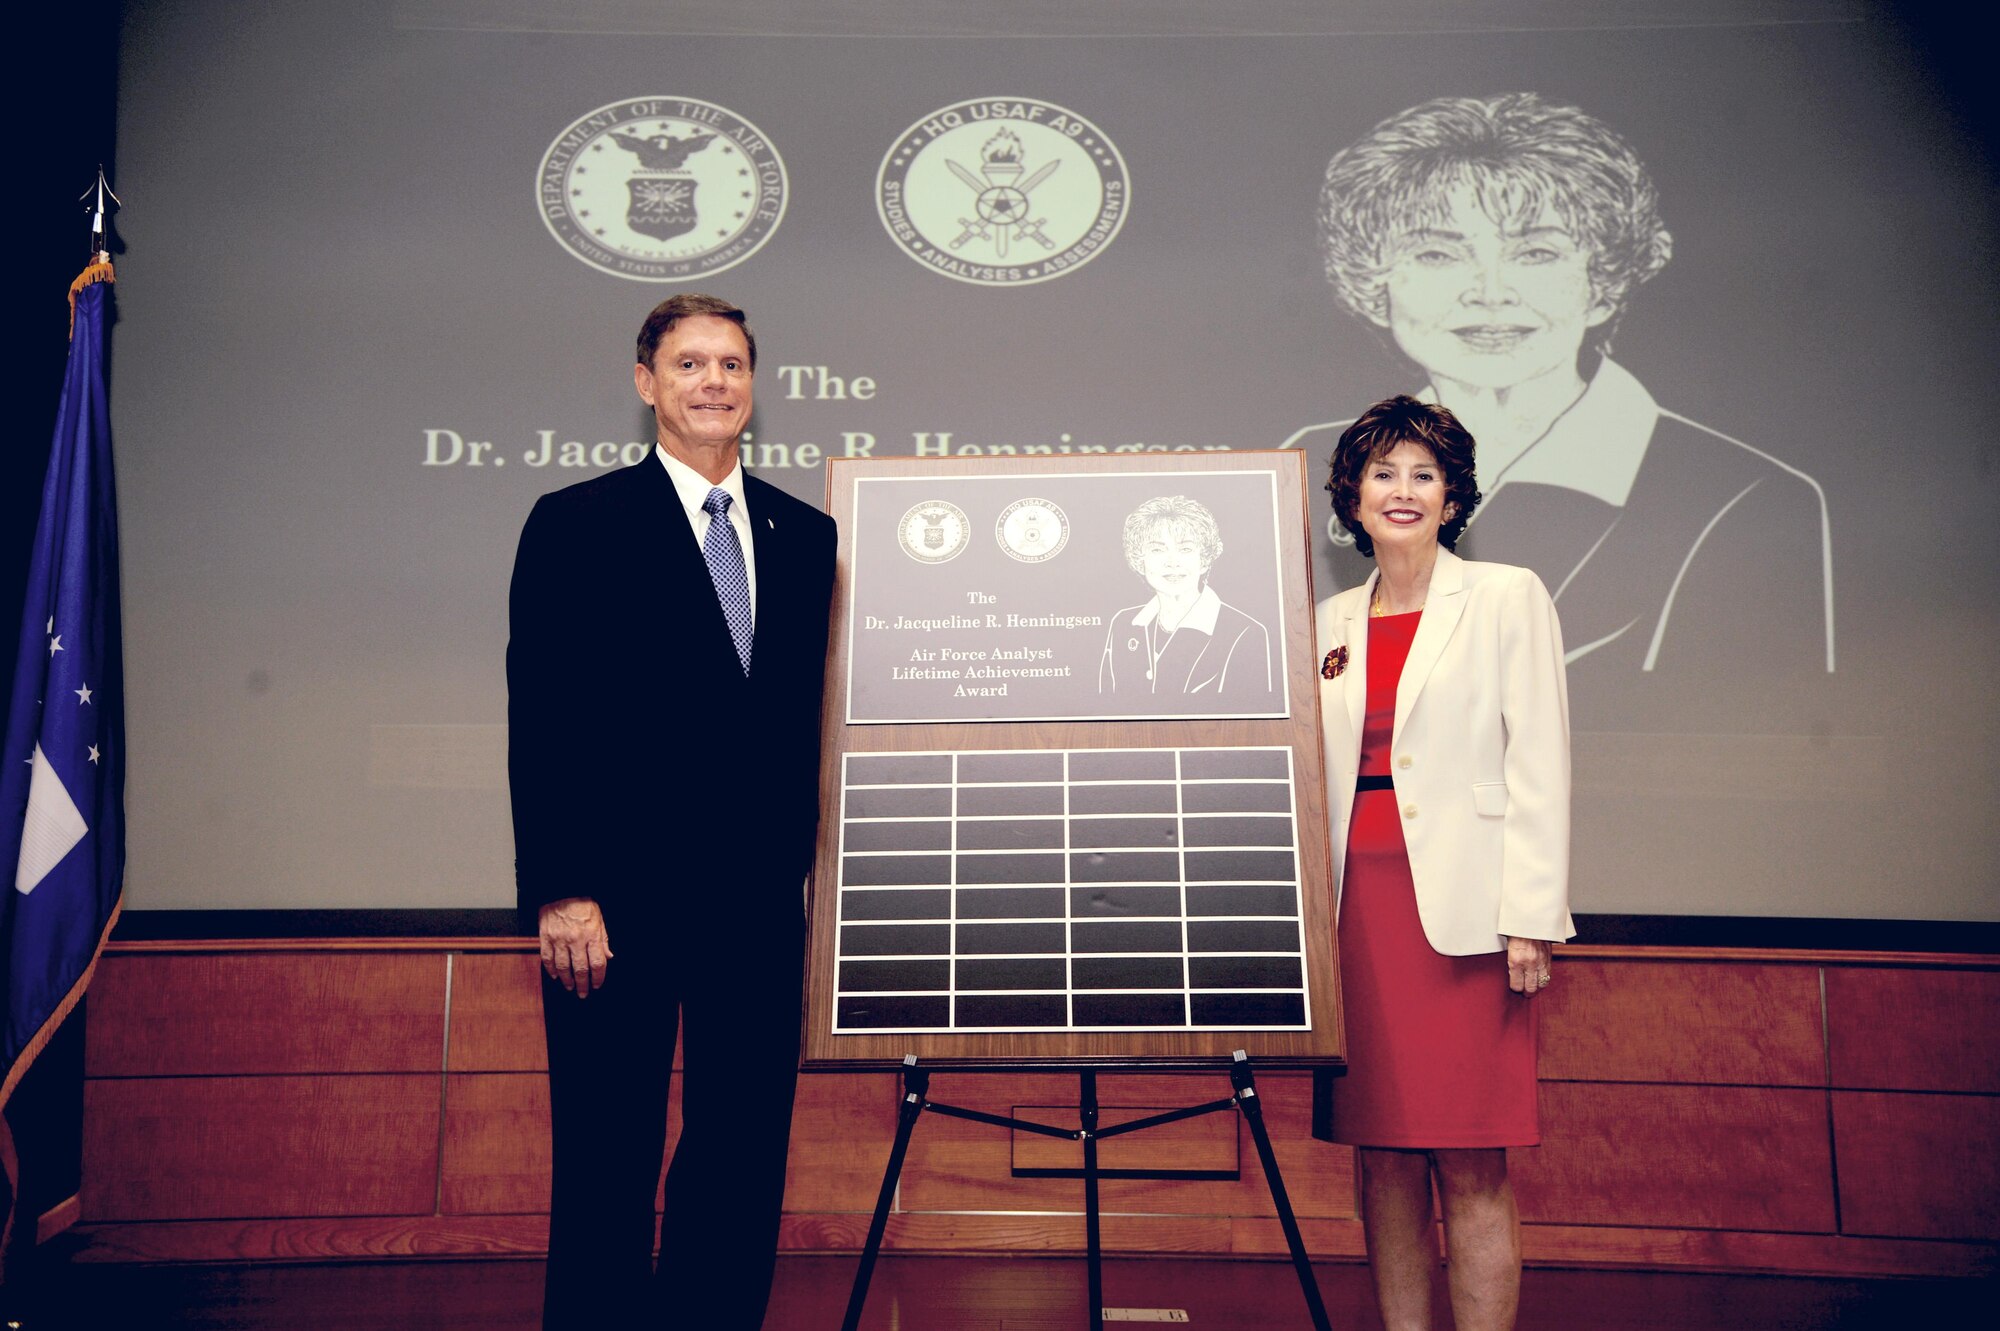 Kevin E. Williams, Director, Air Force Studies, Analyses and Assessments, and Dr. Jacqueline R. Henningsen unveil the Air Force Analyst Lifetime Achievement Award renamed after Dr. Henningsen at the Mark Center, Arlington, Va., June 25, 2015. (U.S. Air force photo/Staff Sgt. Whitney Stanfield)